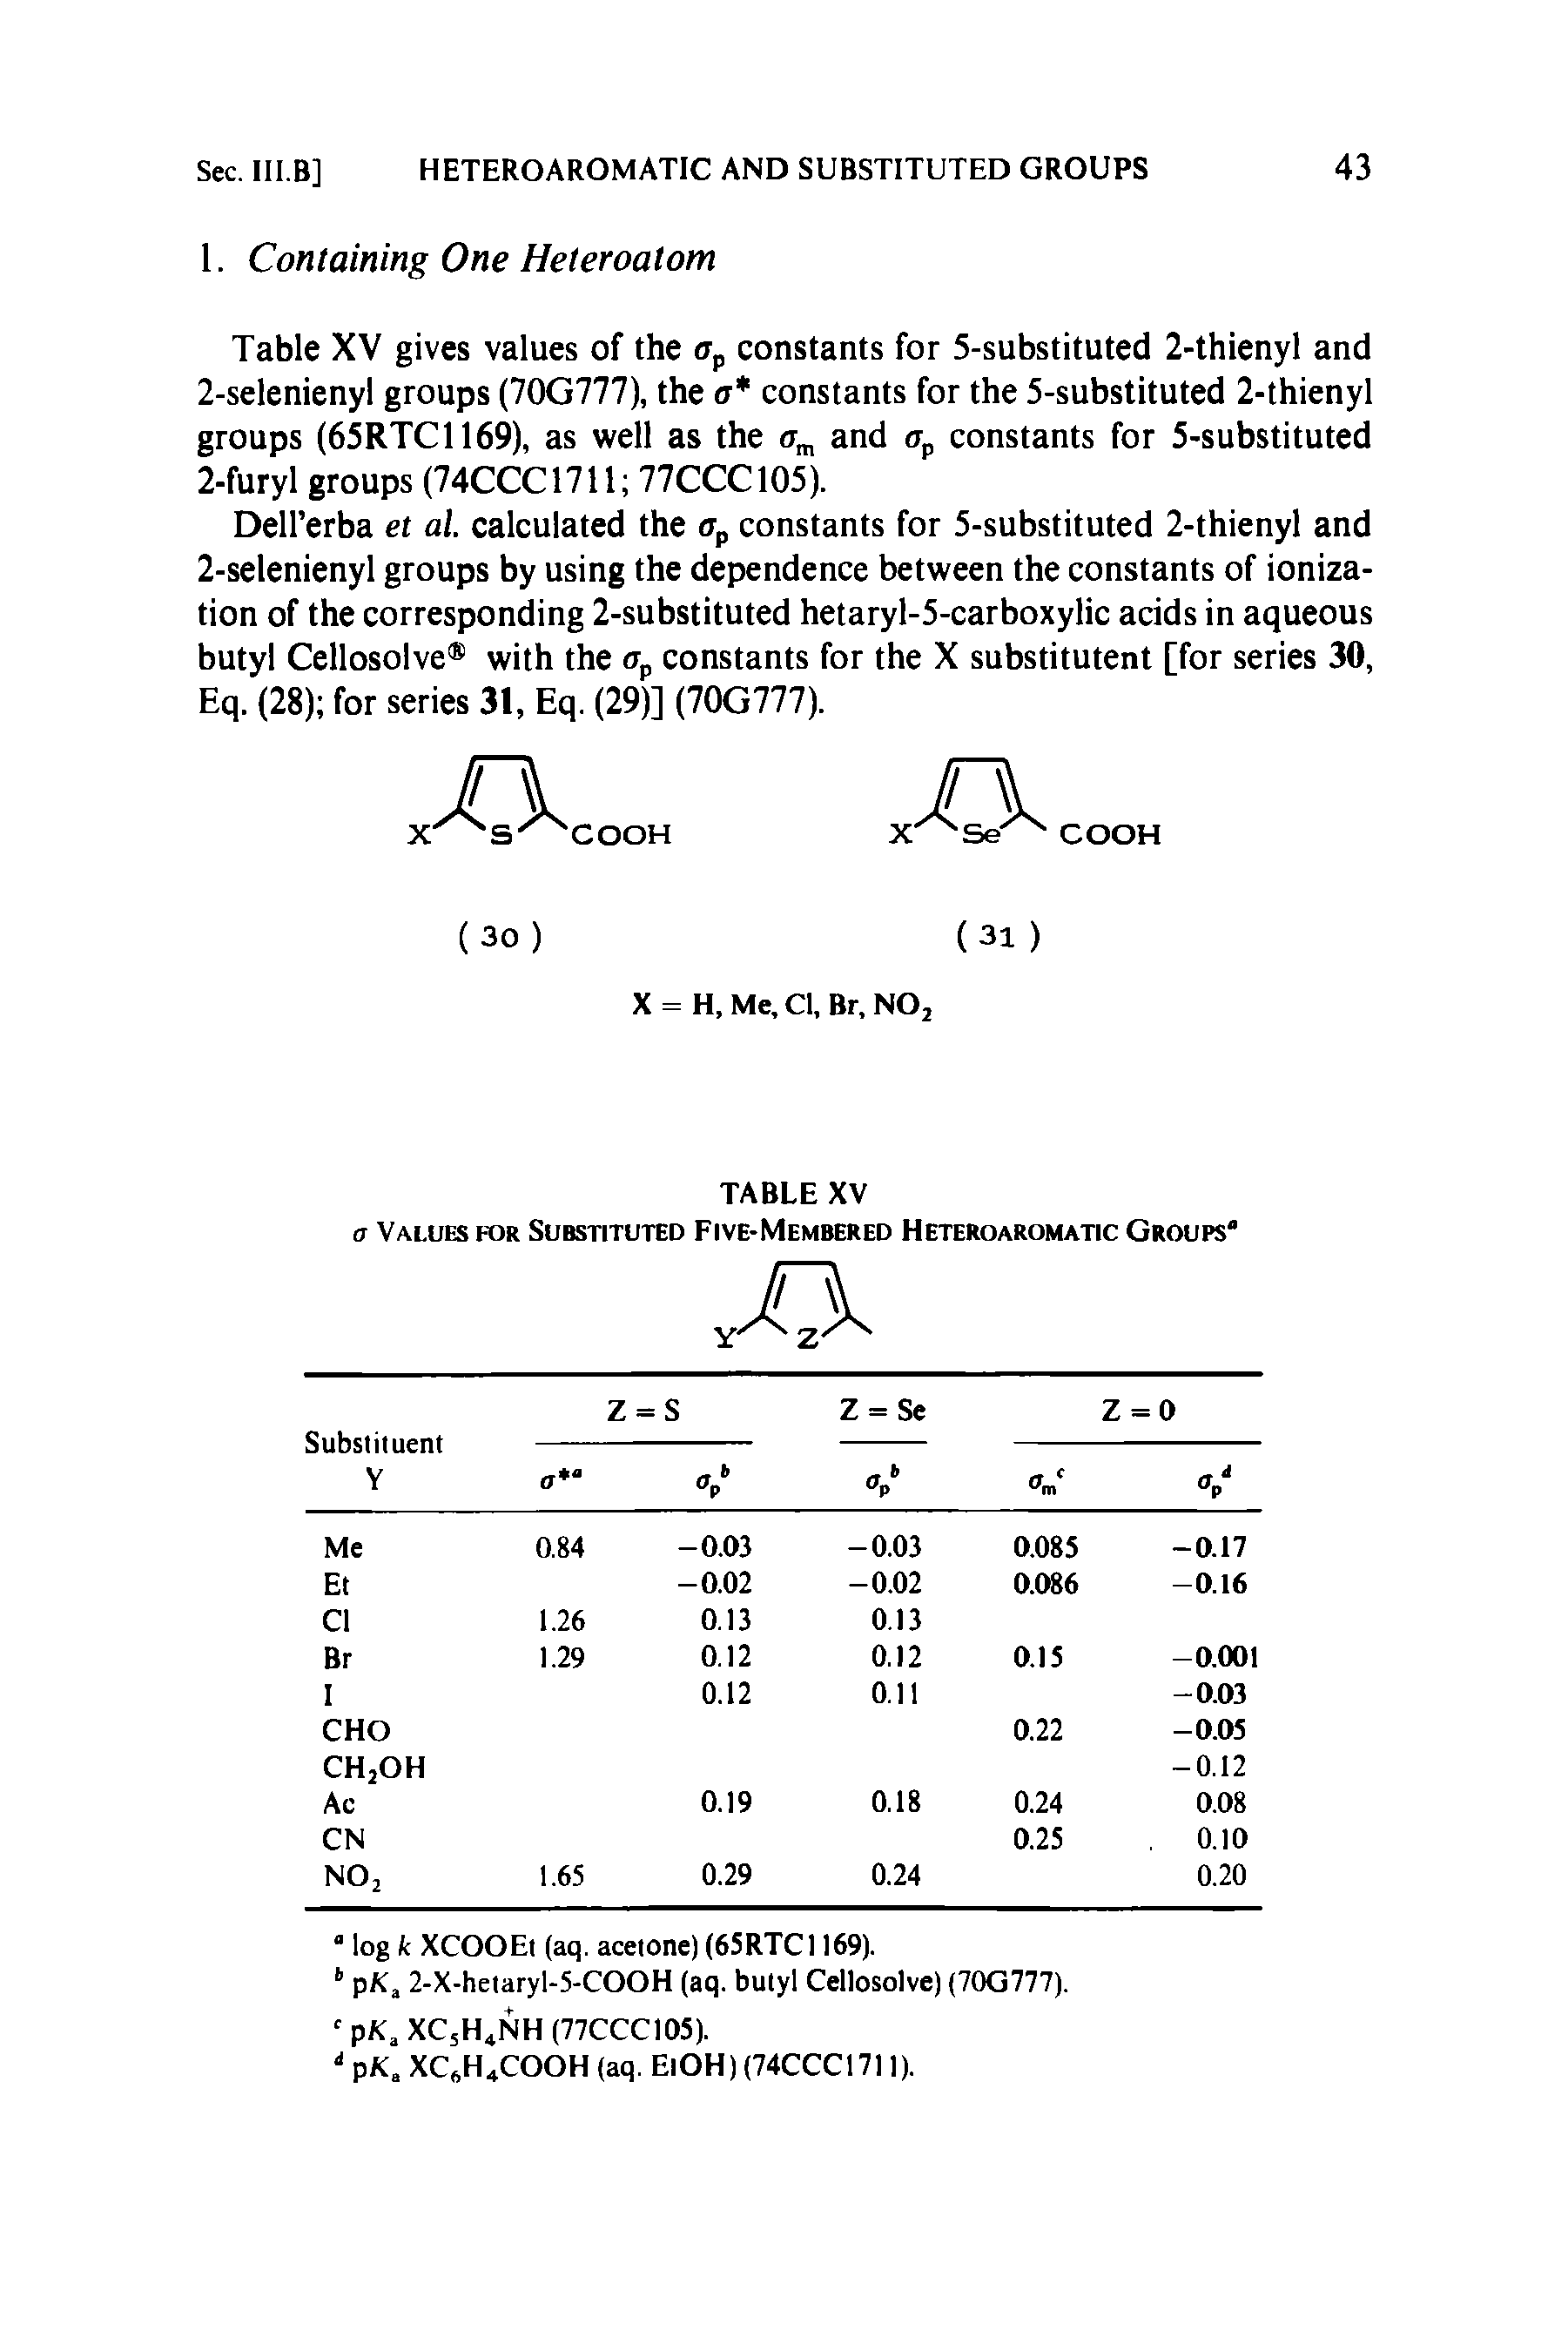 Table XV gives values of the constants for 5-substituted 2-thienyl and 2-selenienyl groups (70G777), the a constants for the 5-substituted 2-thienyl groups (65RTC1169), as well as the and constants for 5-substituted 2-furyl groups (74CCC1711 77CCC105).